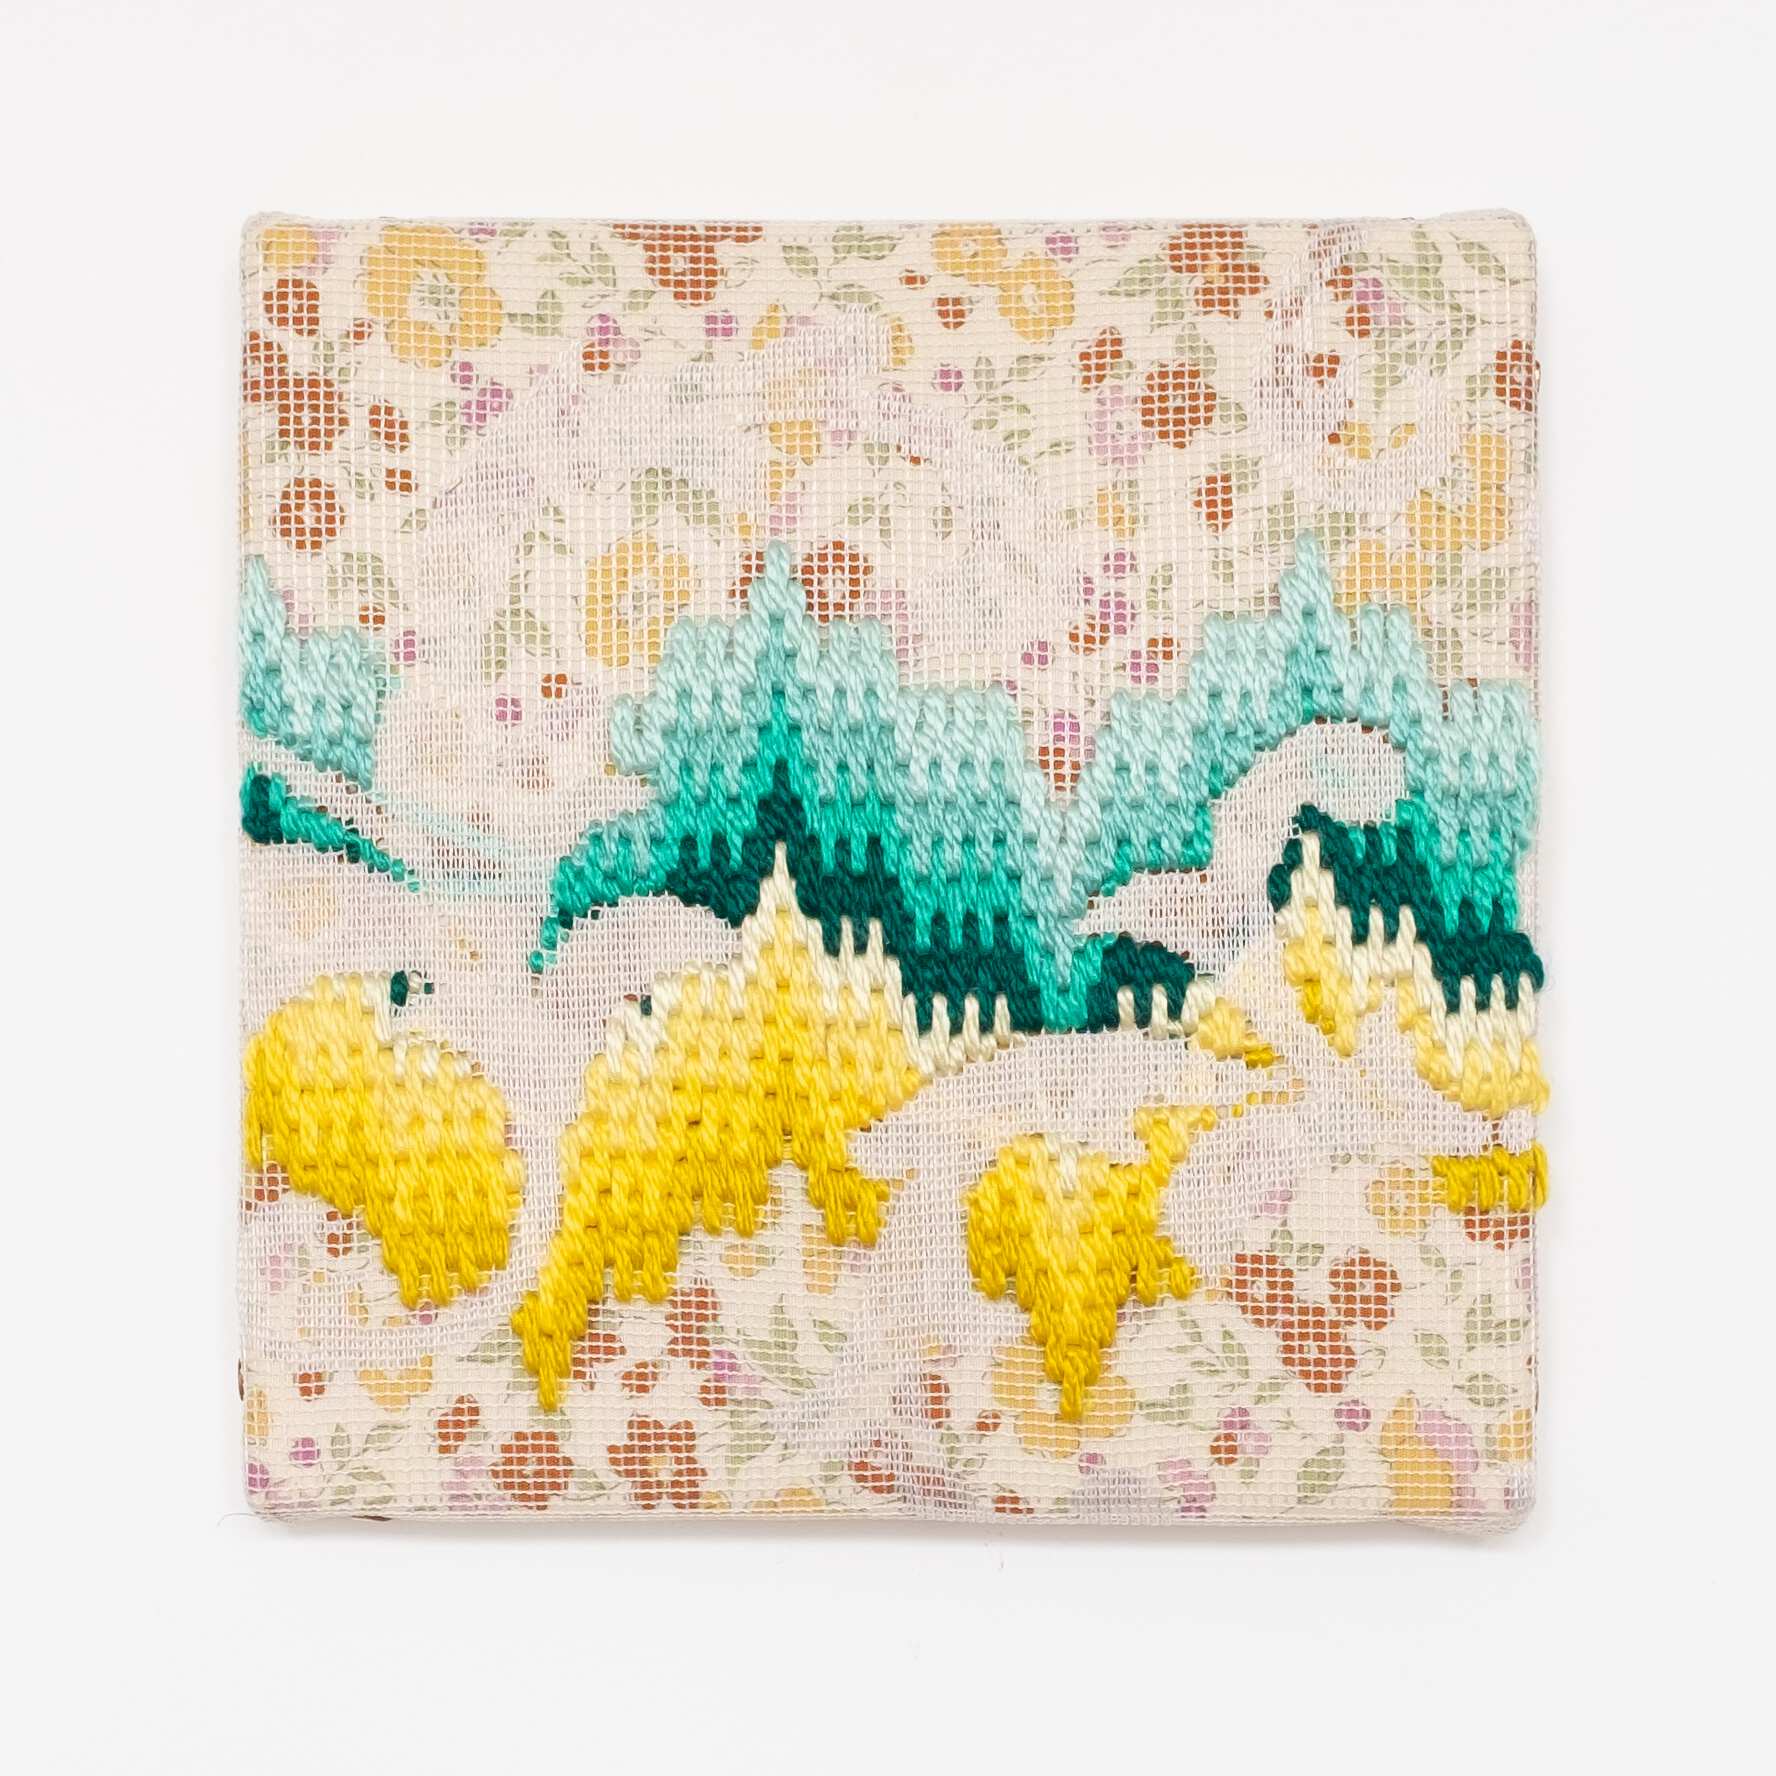 Triple-layer gather-gusset [green-yellow northern lights], Hand-embroidered silk on lace over fabric, 2019